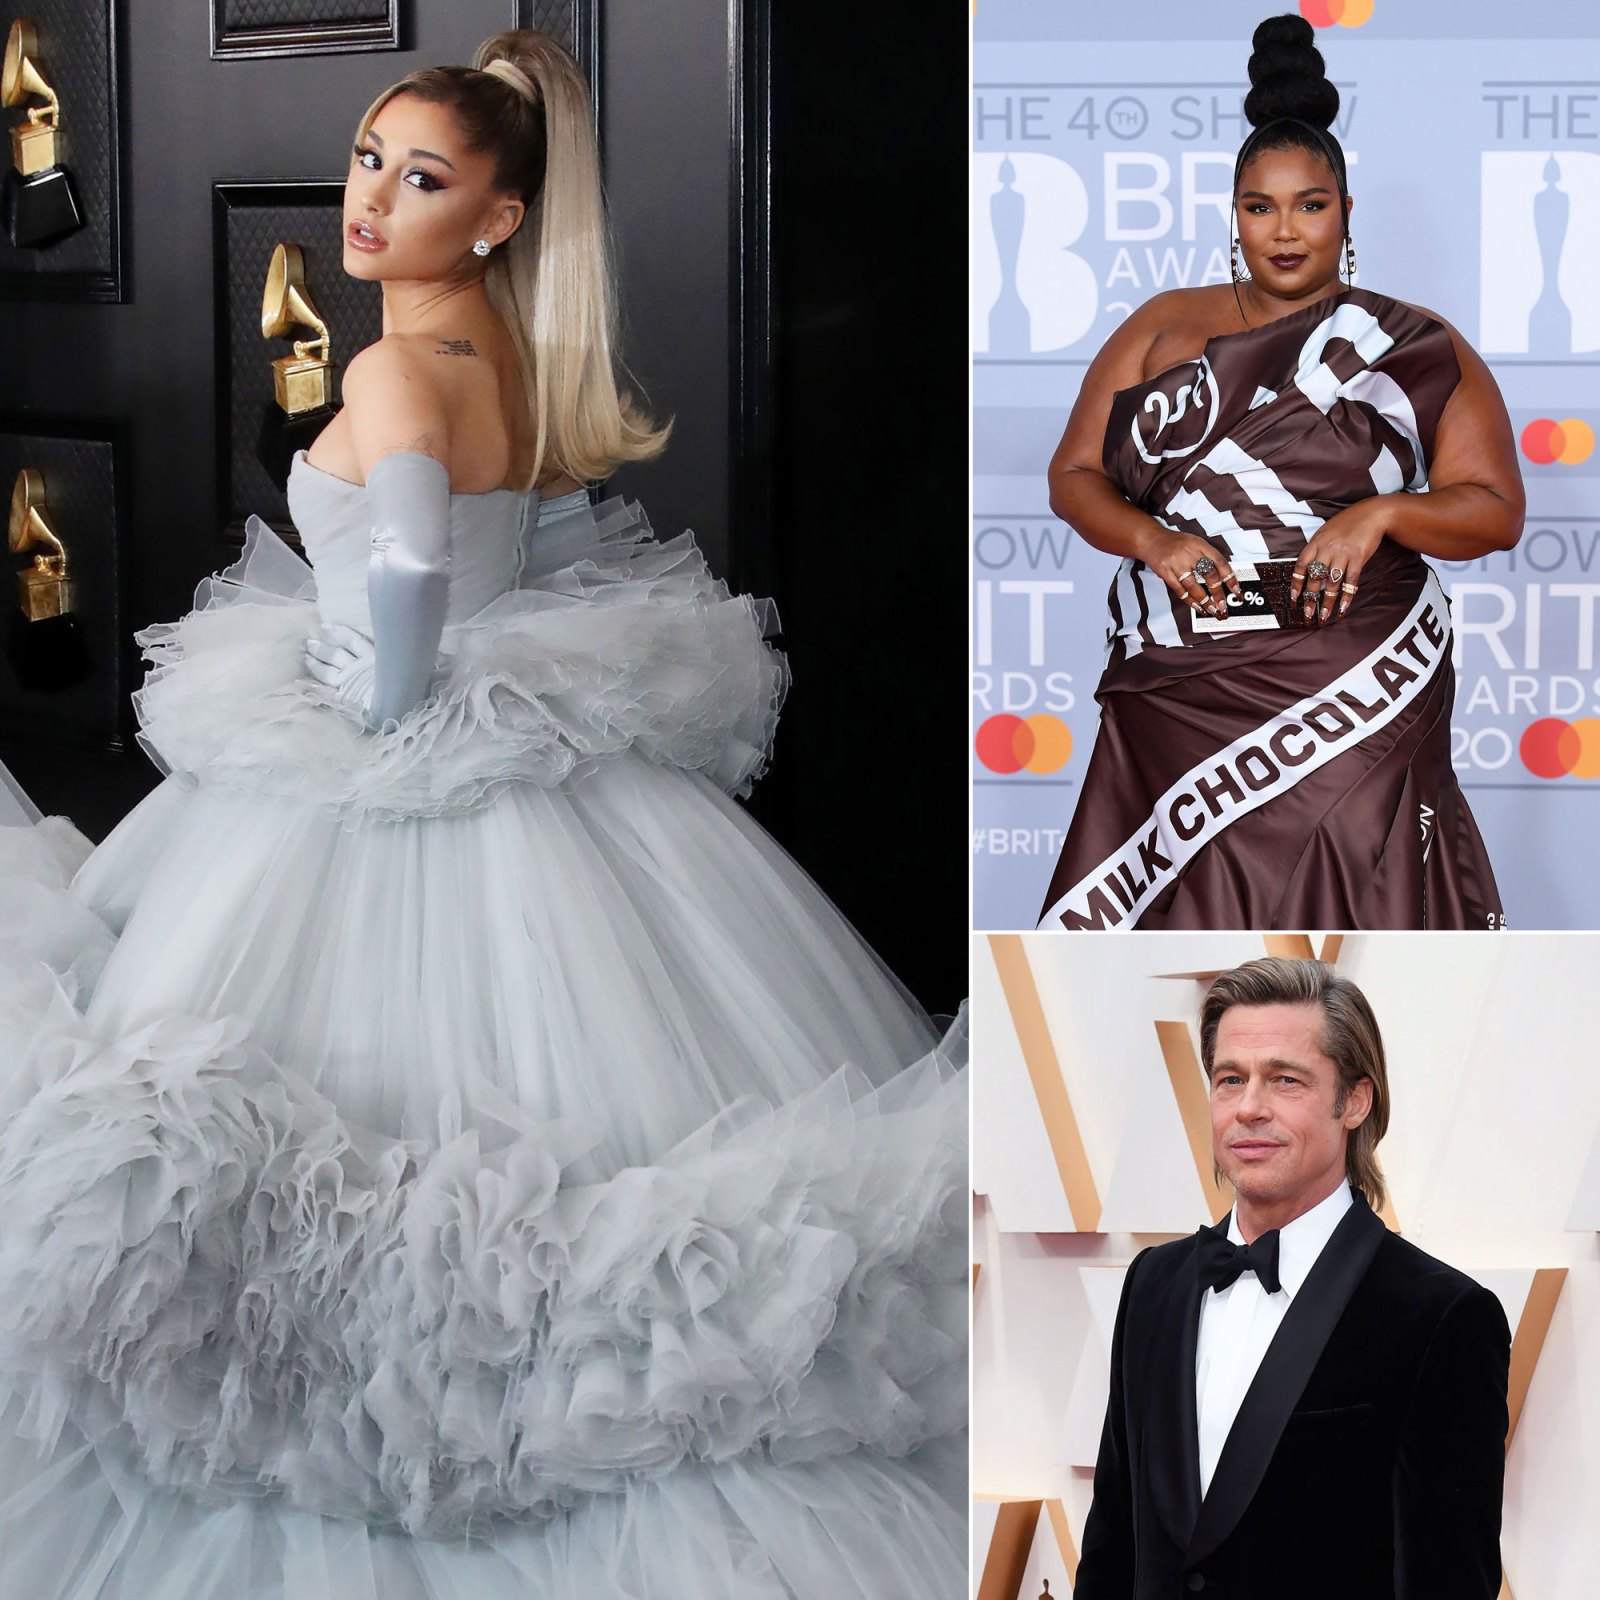 The Most Glam Red Carpet Moments of 2020